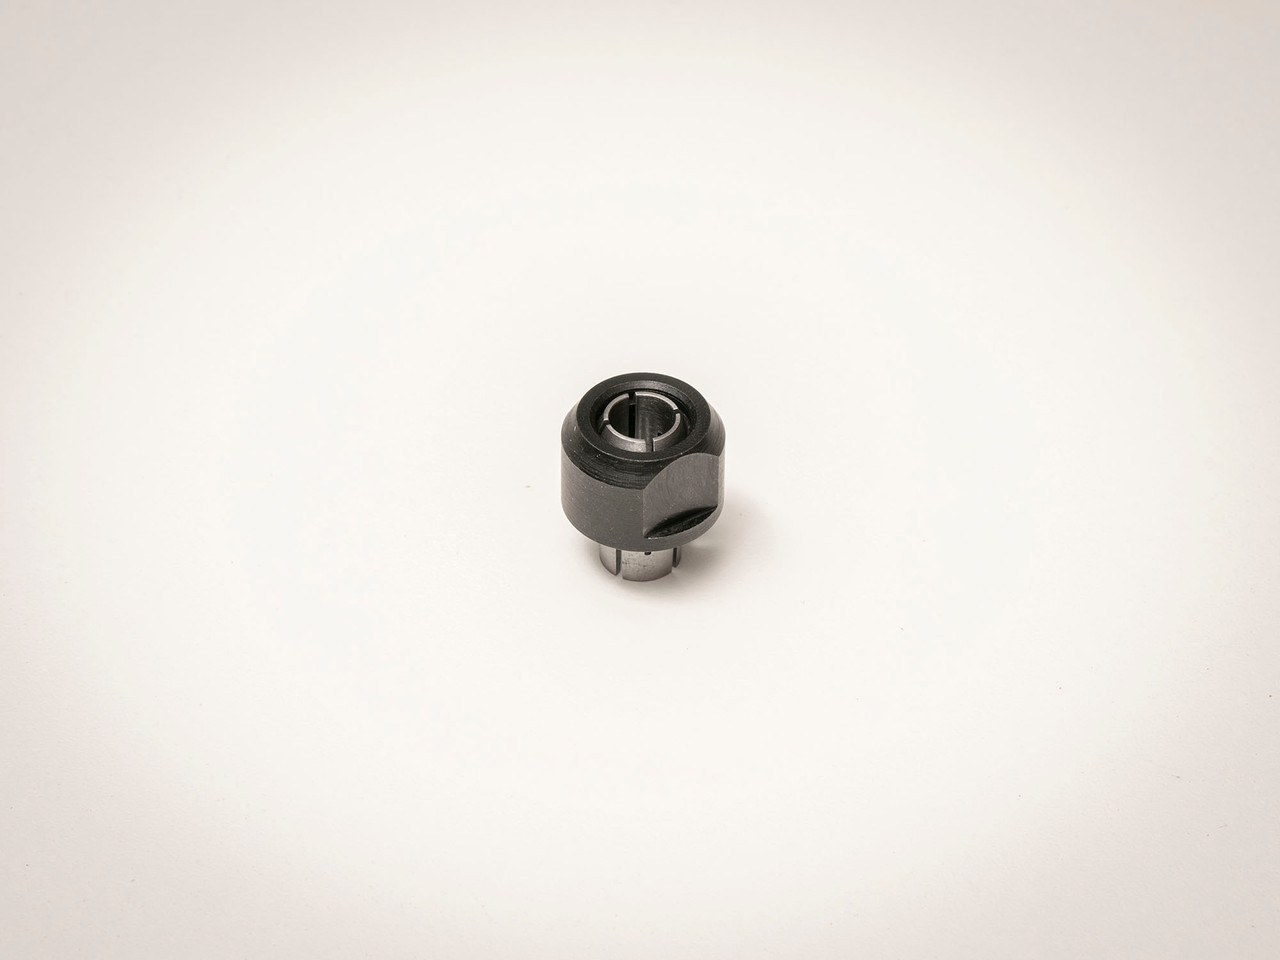 This high quality 8mm collet is compatible with DeWalt compact routers.